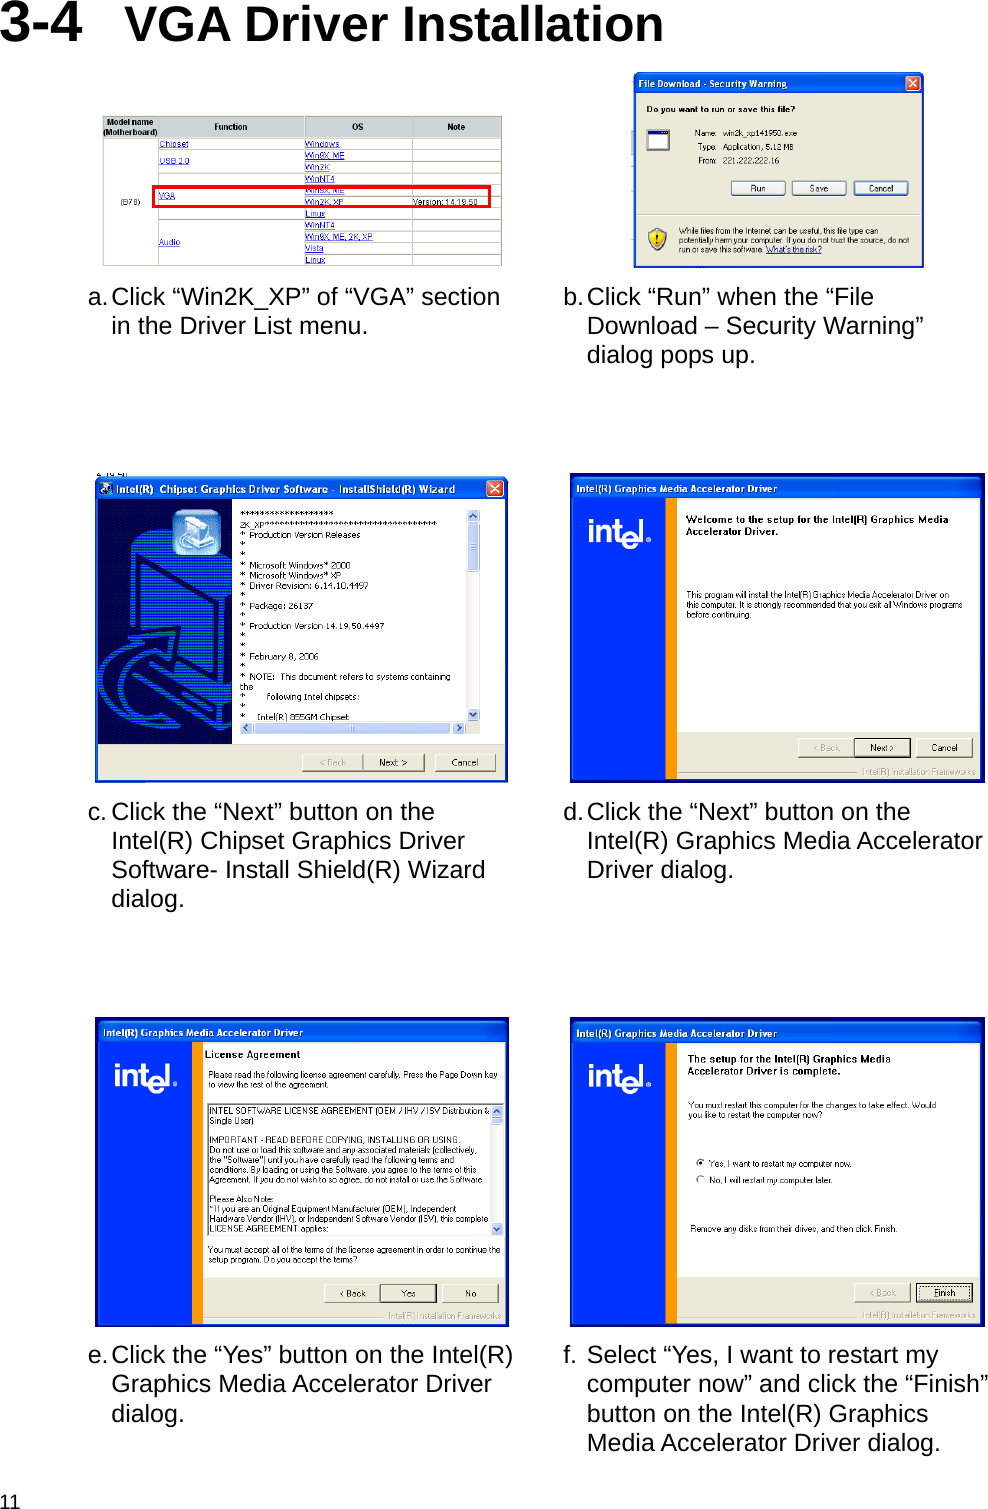  11 3-4  VGA Driver Installation    a. Click “Win2K_XP” of “VGA” section in the Driver List menu.  b. Click “Run” when the “File Download – Security Warning” dialog pops up.   c. Click the “Next” button on the Intel(R) Chipset Graphics Driver Software- Install Shield(R) Wizard dialog. d. Click the “Next” button on the Intel(R) Graphics Media Accelerator Driver dialog.   e. Click the “Yes” button on the Intel(R) Graphics Media Accelerator Driver dialog. f. Select “Yes, I want to restart my computer now” and click the “Finish” button on the Intel(R) Graphics Media Accelerator Driver dialog. 